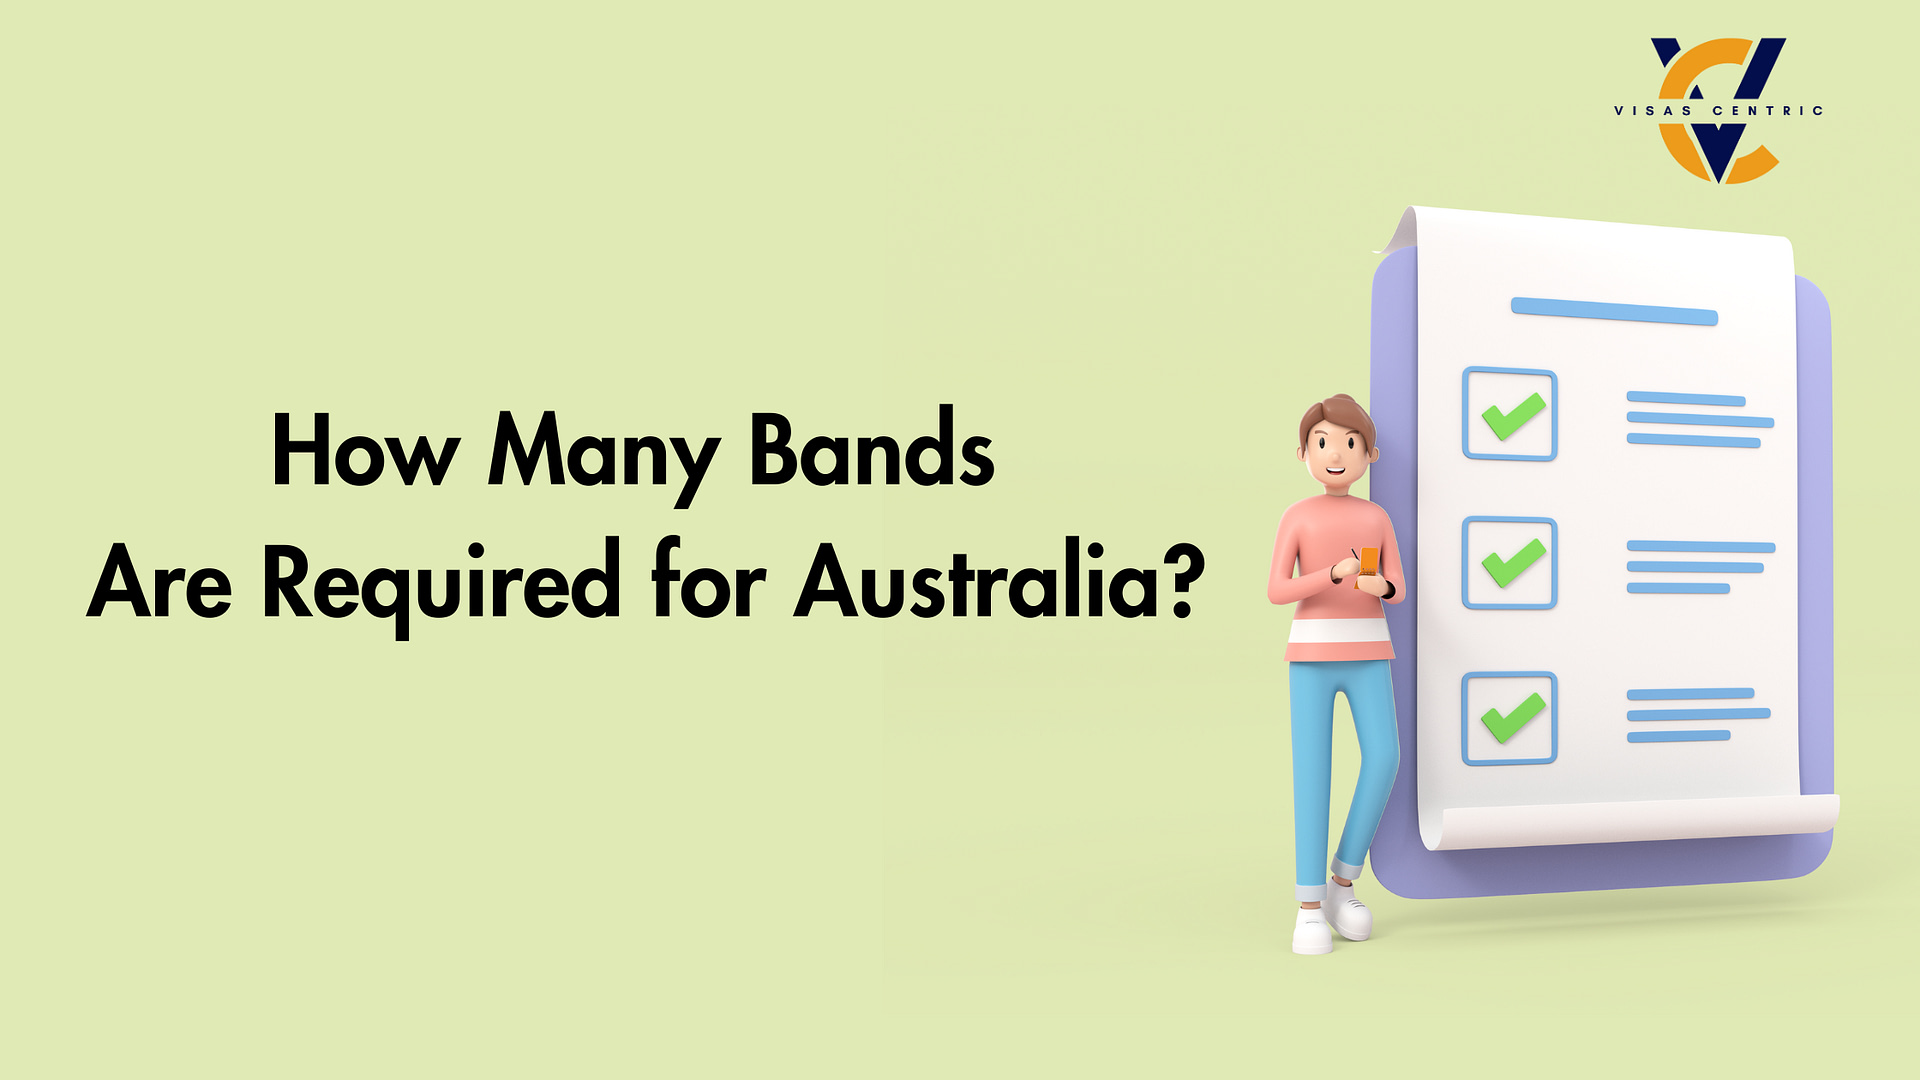 How Many Bands Are Required for Australia?